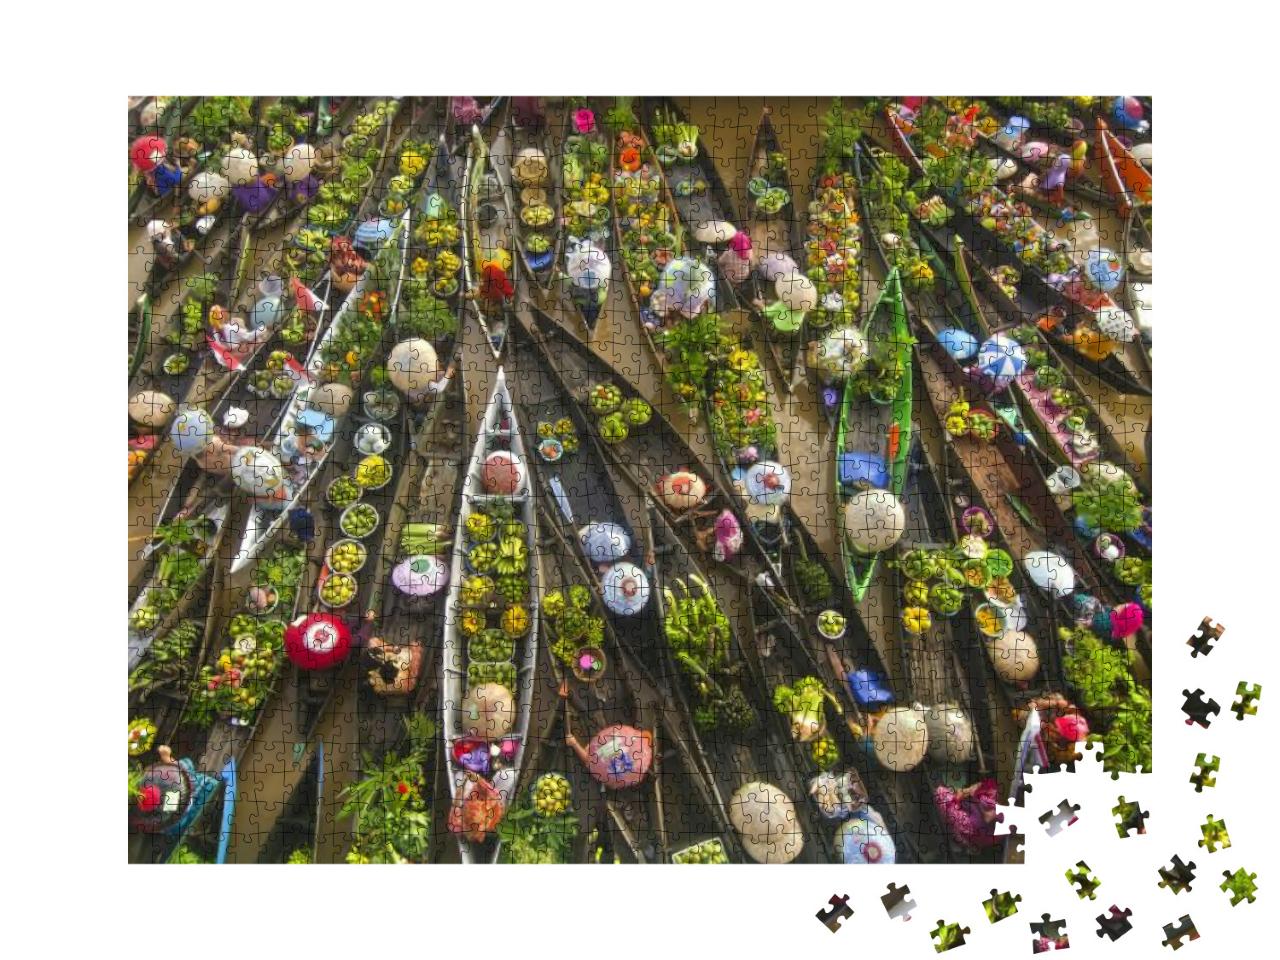 Floating Market... Jigsaw Puzzle with 1000 pieces